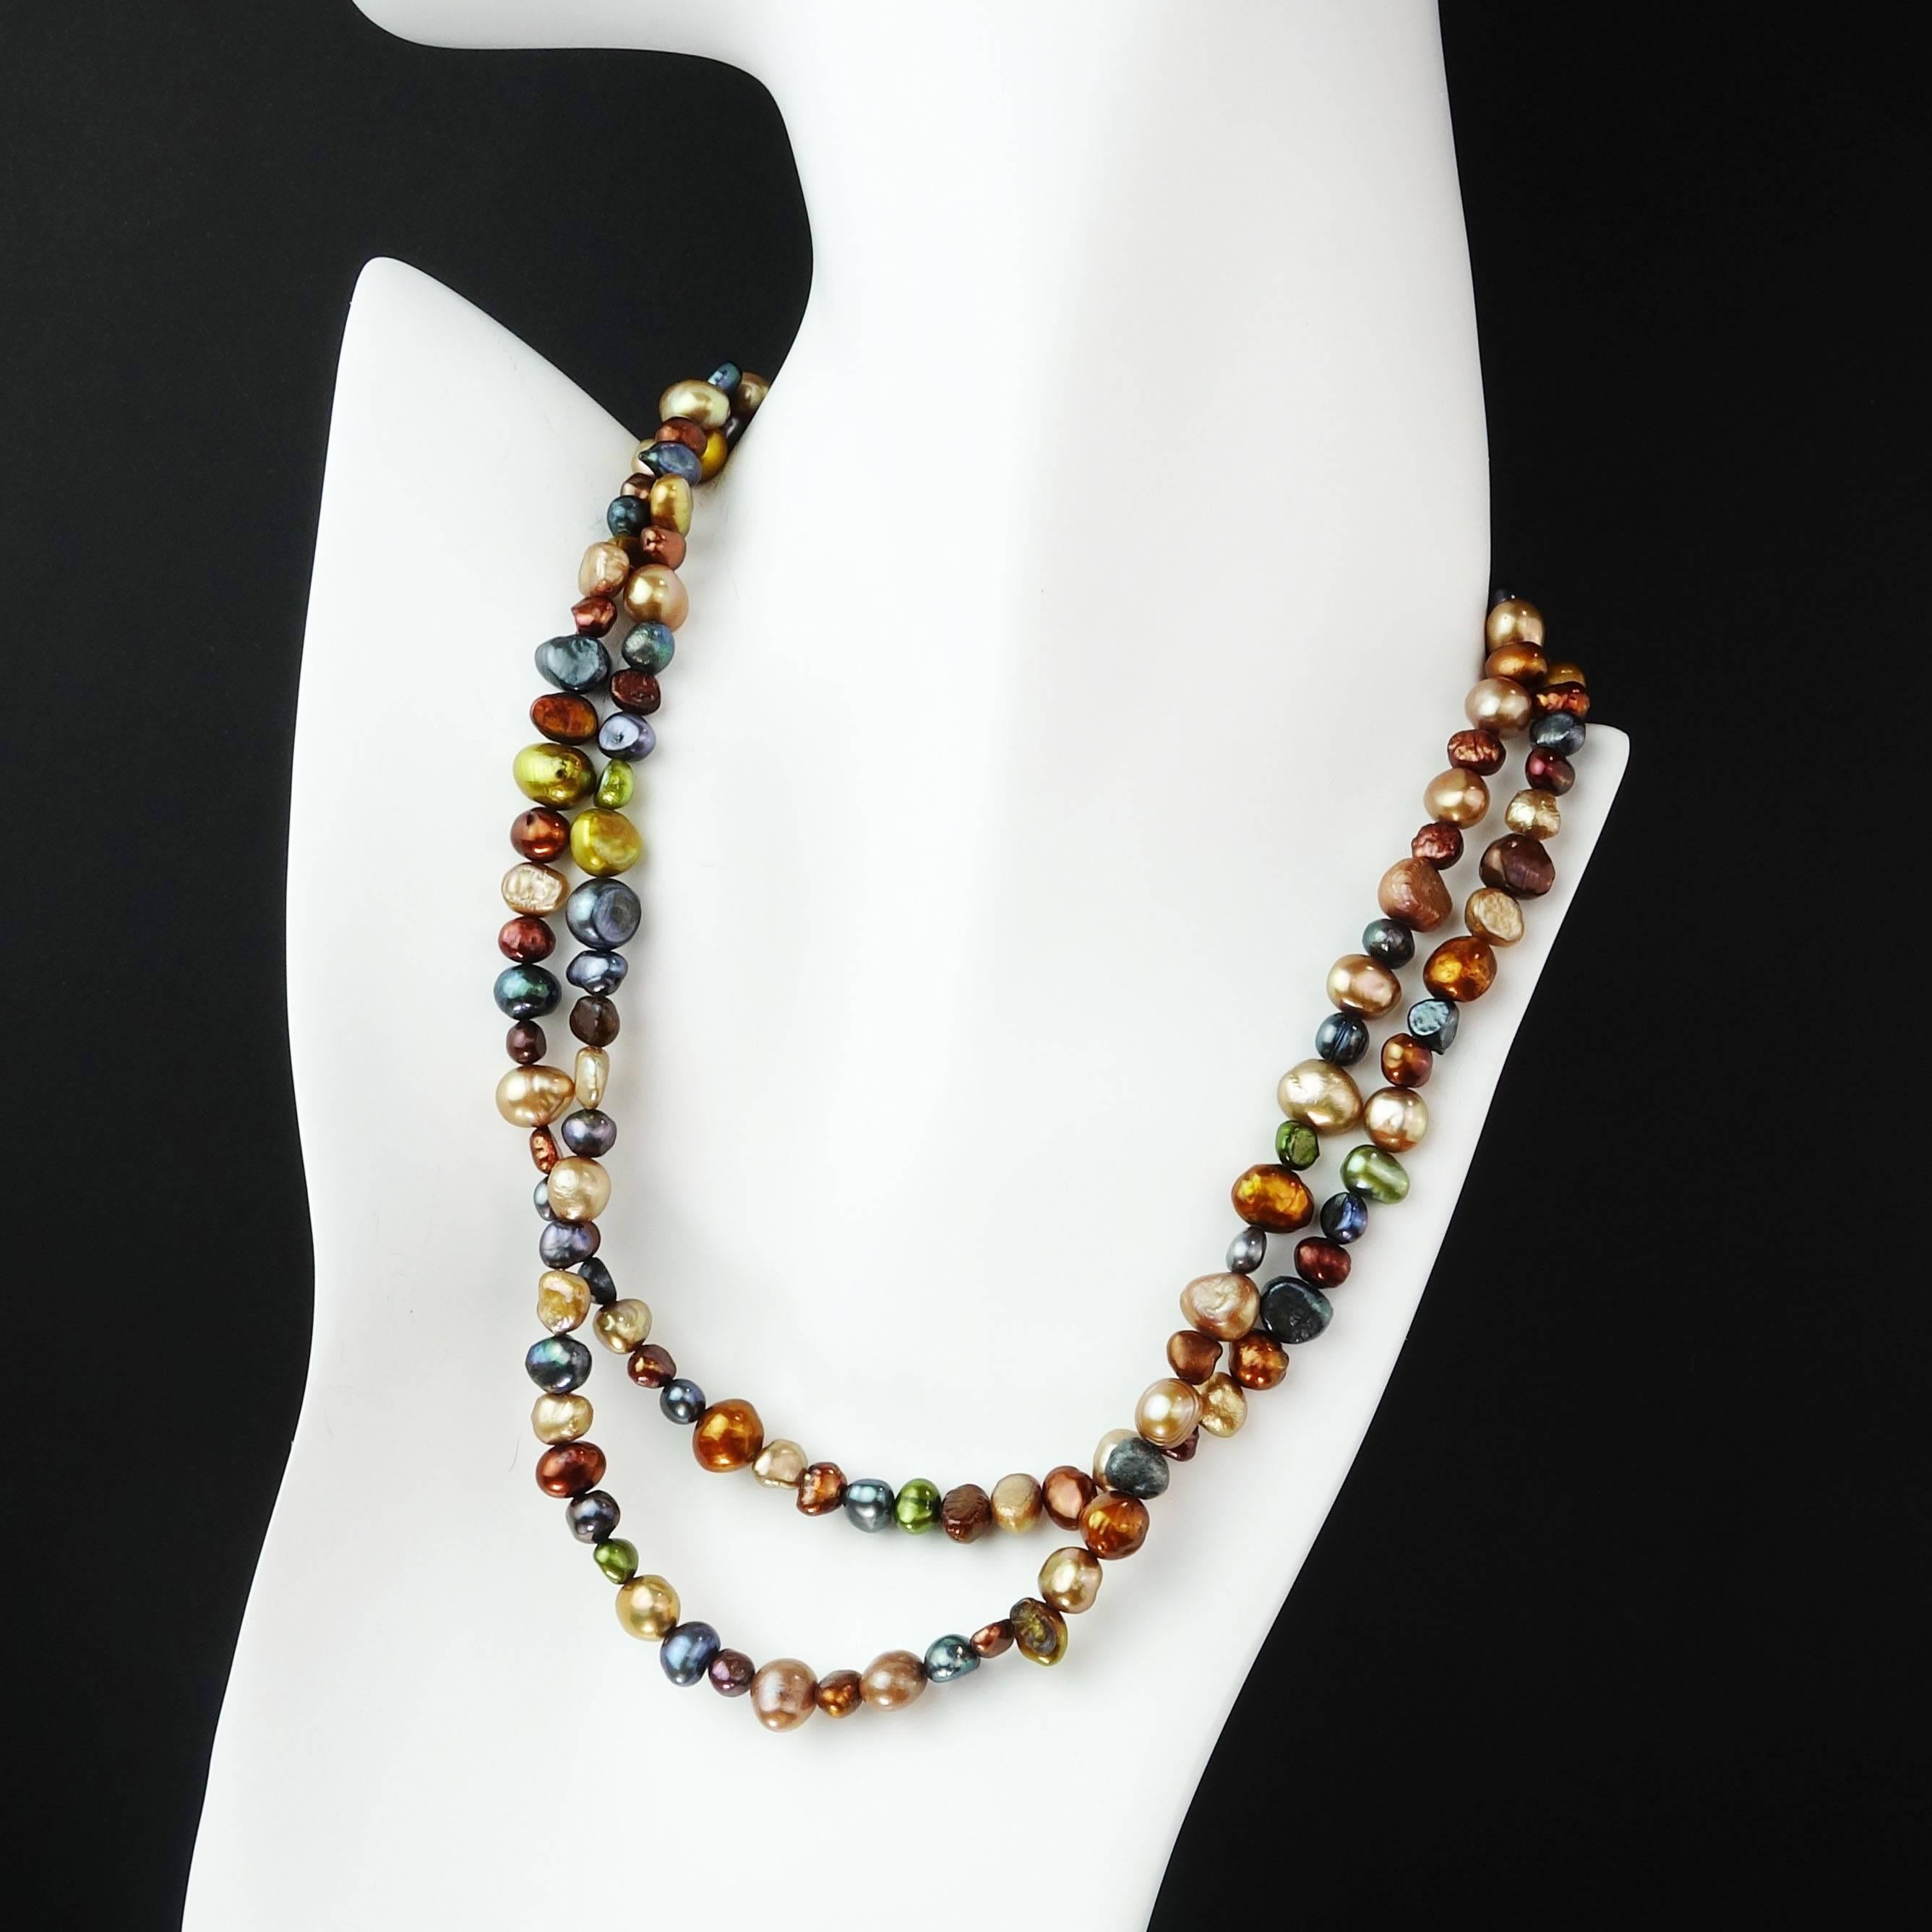 34 Inch Necklace of Deep Jewel tone freshwater Pearls.  This necklace features gold, red, blue, rust, green, gray, and aubergine Freshwater Pearls. The pearls are approximately 3-8mm in size.  At 34 inches it could be wrapped twice. This necklace